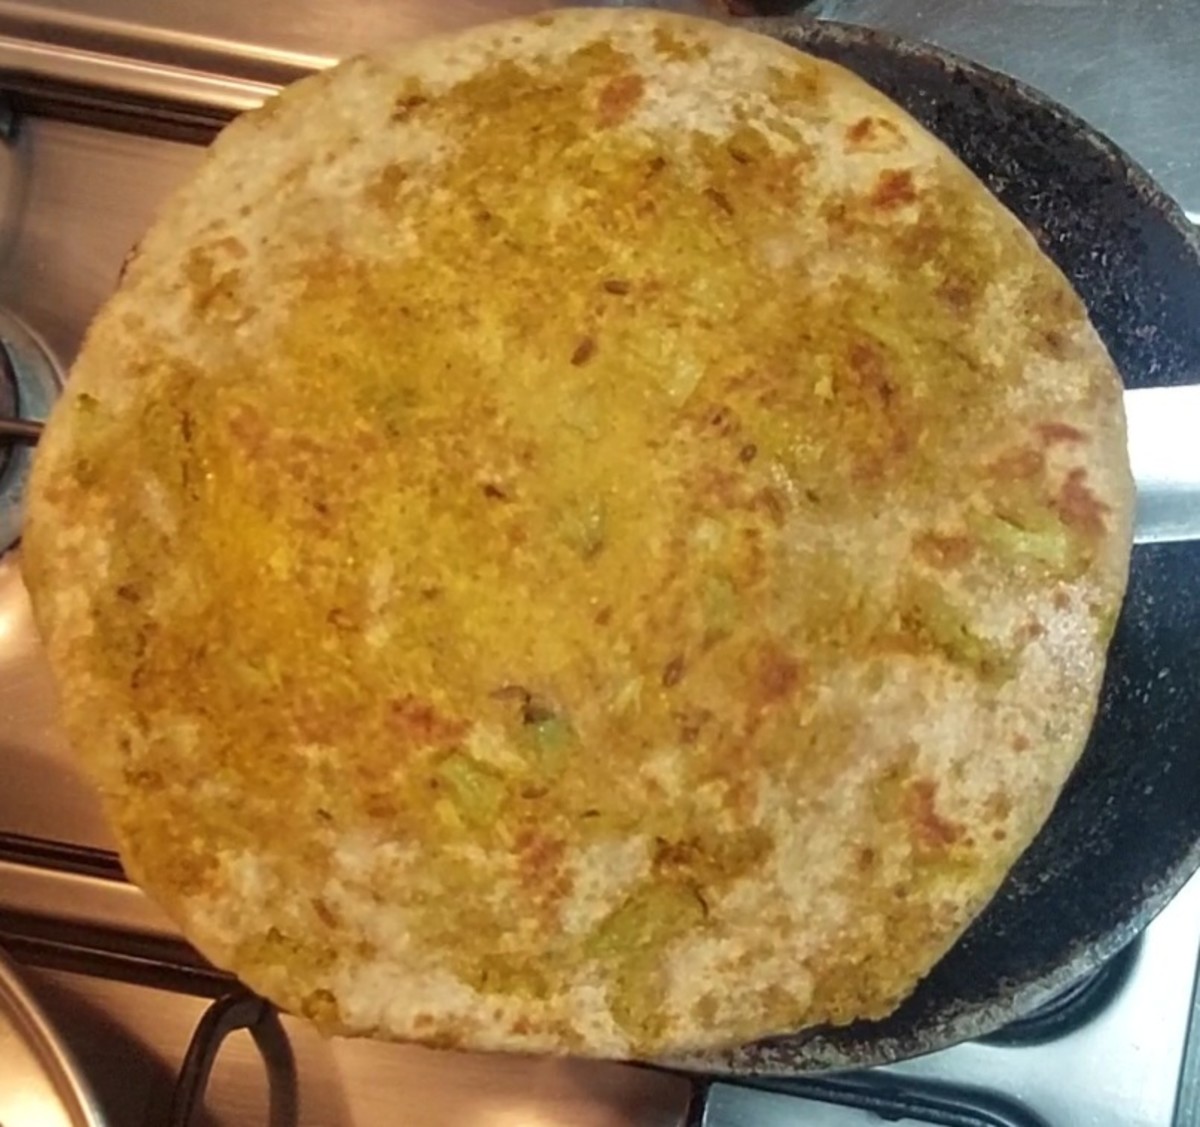 Heat a tawa, drizzle a few drops of ghee on the tawa, add rolled paratha, and cook. Drizzle a few more drops of ghee on the paratha. Flip and cook the other side till brown spots appear. Add more ghee if required.